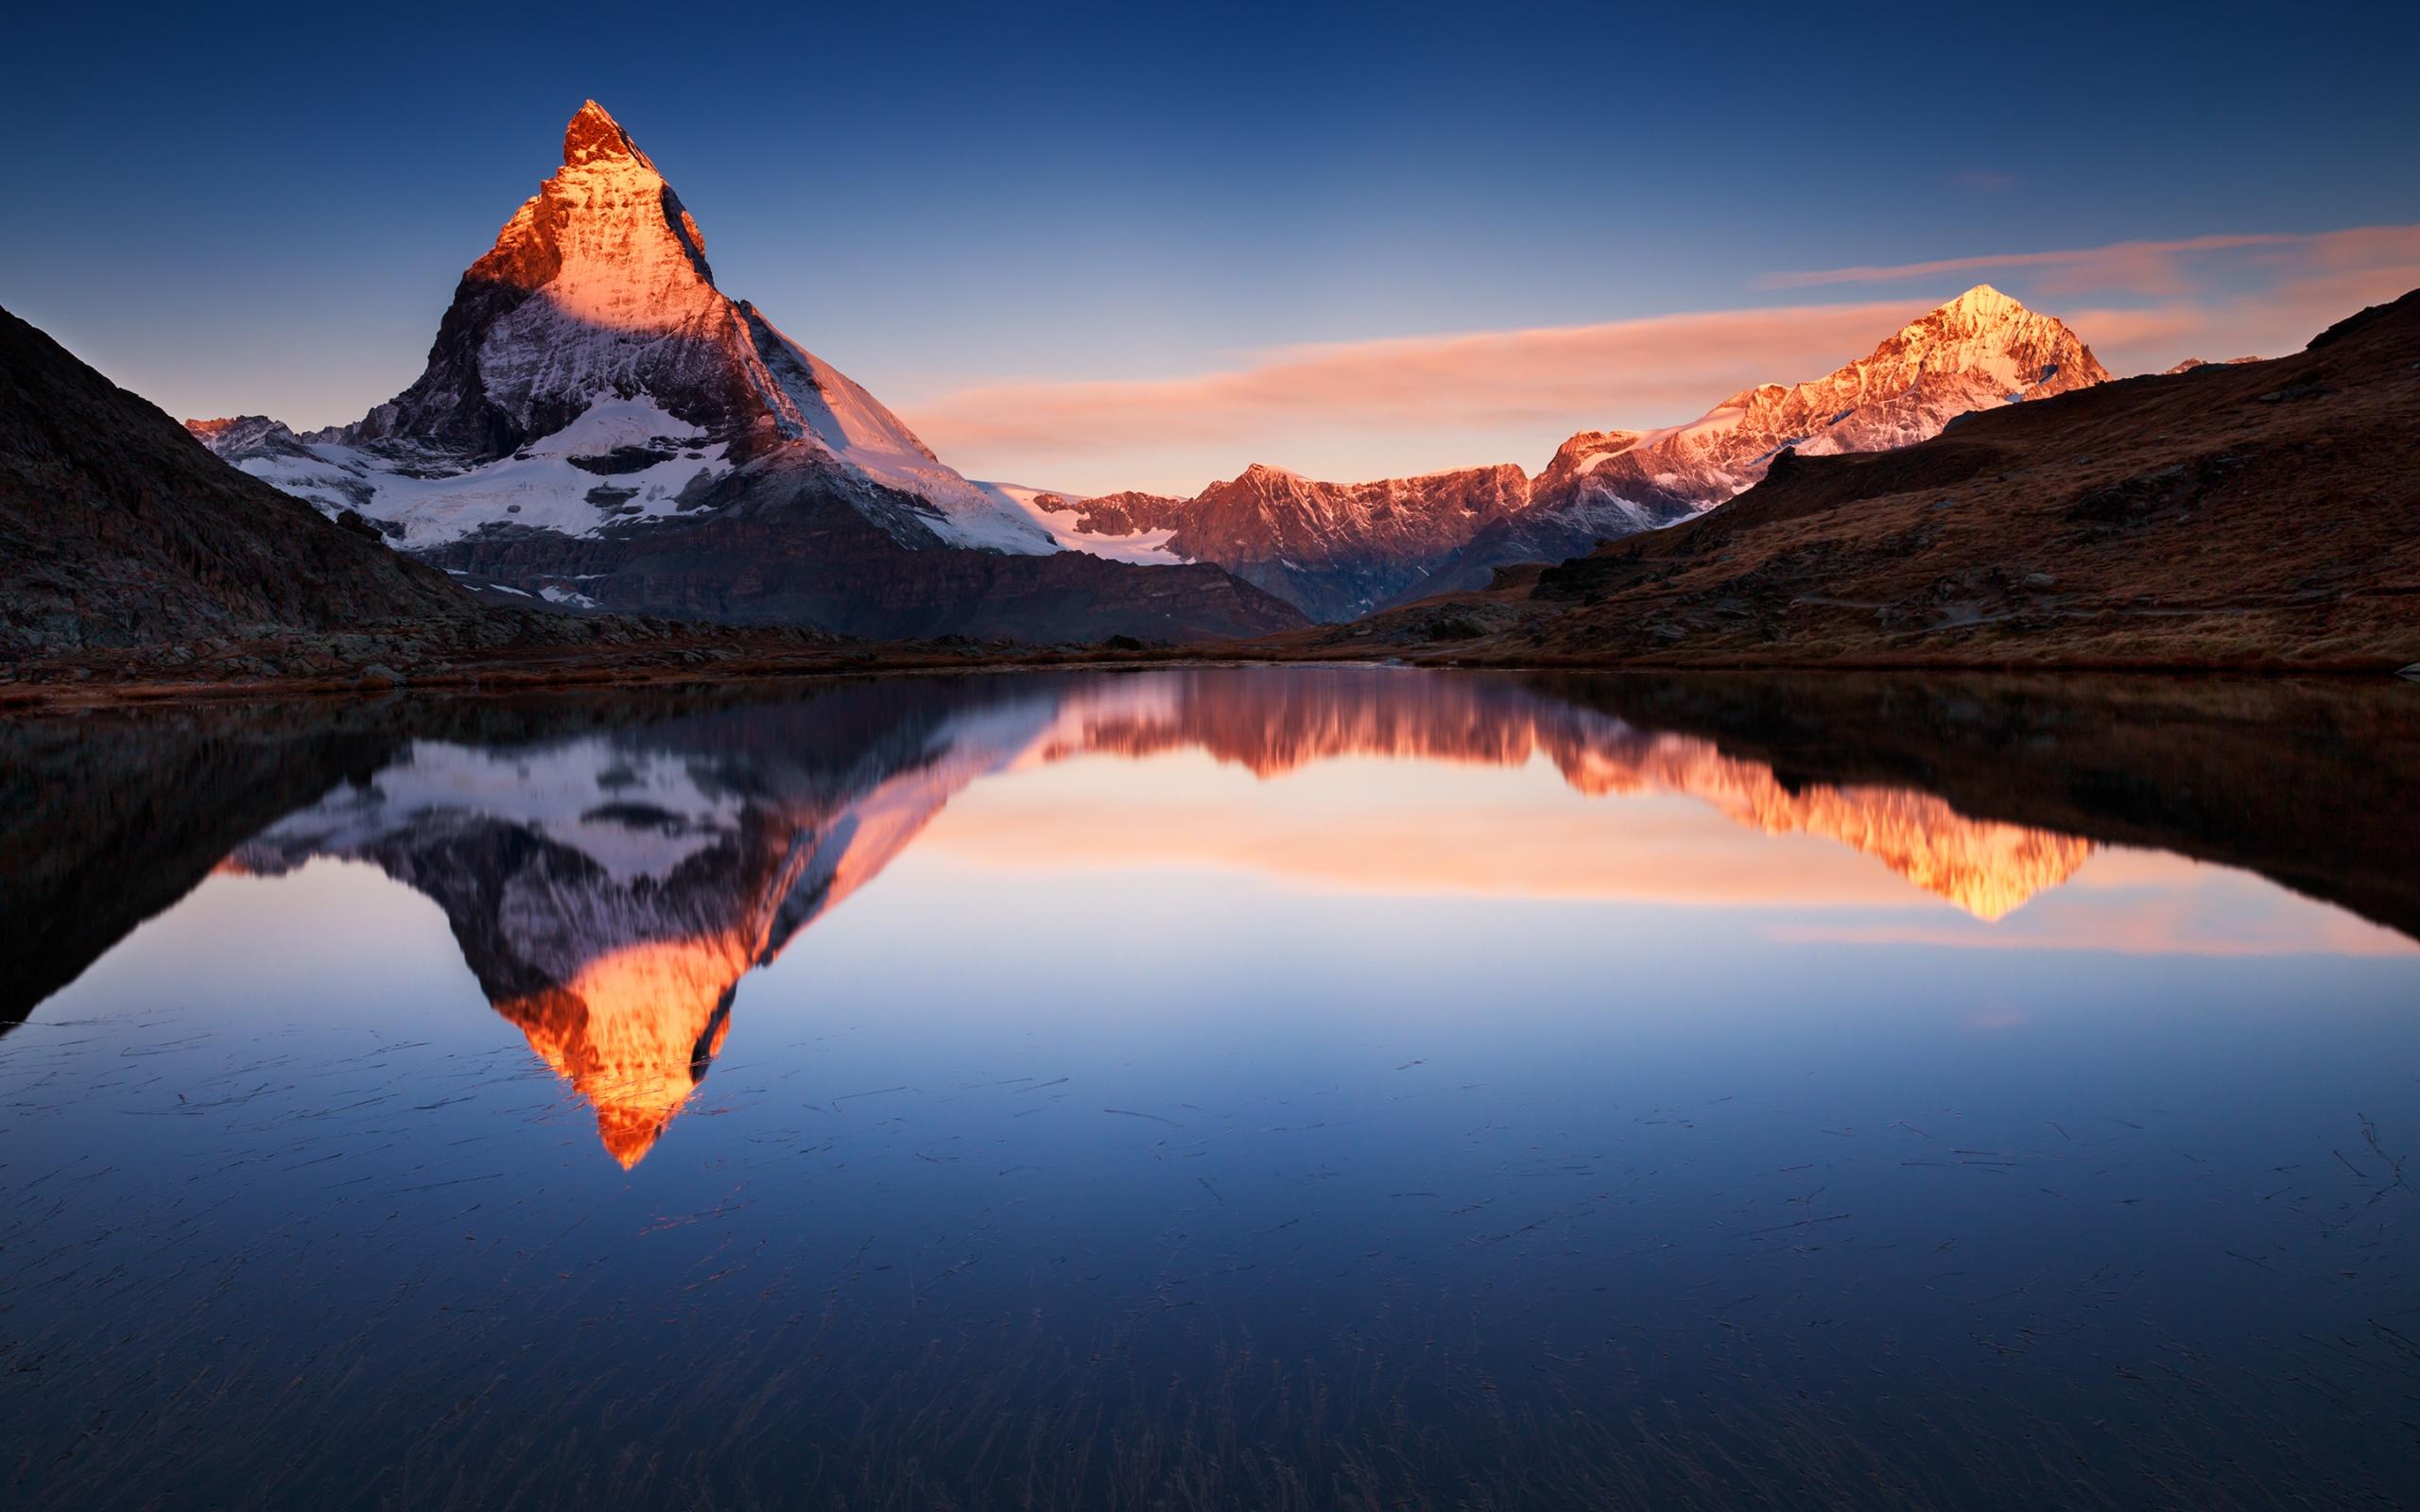 Lake Mountain Reflections Wallpaper in jpg format for free